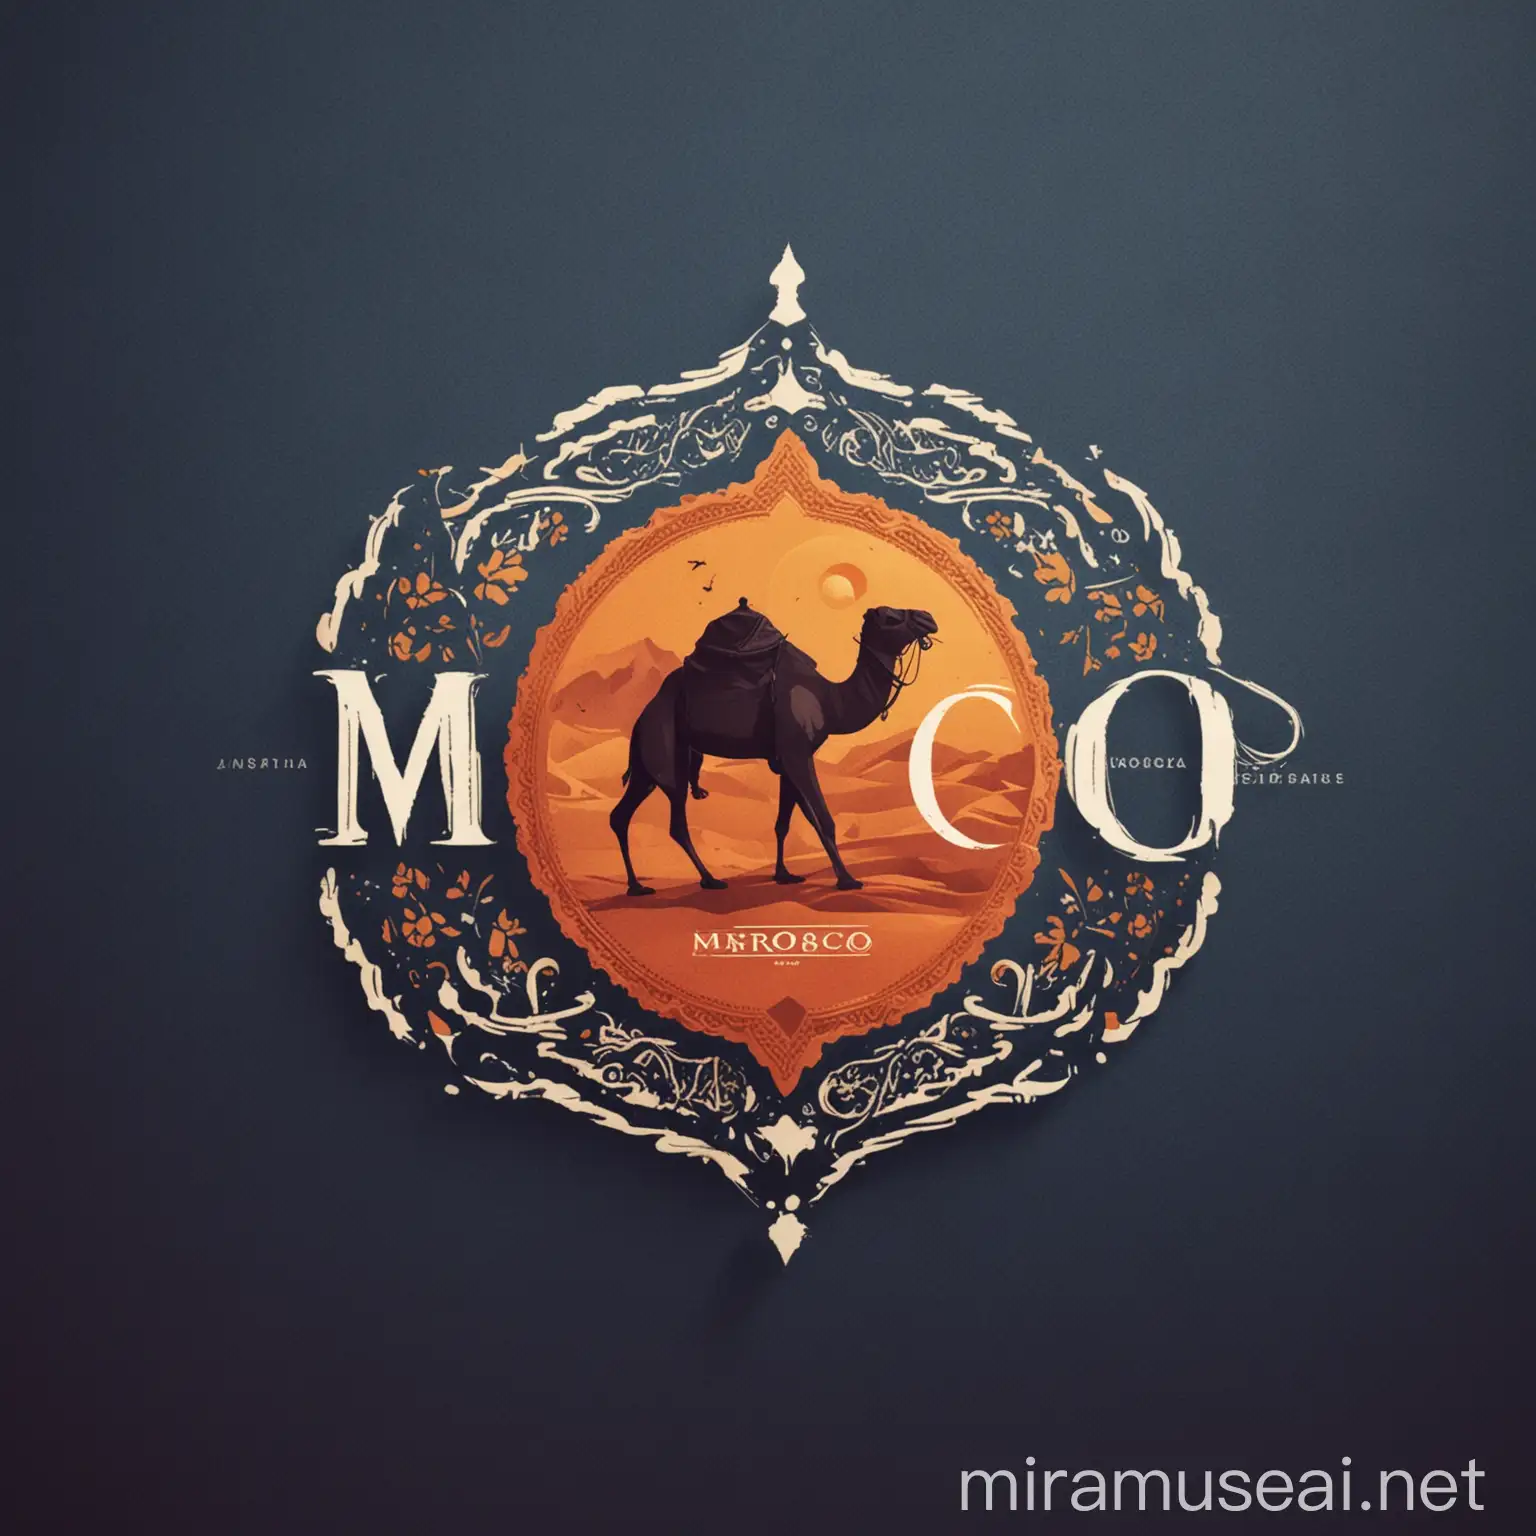 Create a captivating logo for Morocco Premium Tours, a premier destination for travelers seeking to explore the beauty of Morocco. The logo should embody the spirit of adventure, luxury, and cultural richness synonymous with Moroccan experiences.

Include the following elements:

Iconography: Incorporate iconic Moroccan motifs such as traditional architecture patterns, the Atlas Mountains silhouette, or desert dunes curves.
Colors: Explore vibrant hues reminiscent of Moroccan landscapes - think rich blues, warm oranges, deep reds, and earthy tones.
Typography: Choose elegant yet modern fonts that reflect the brand's commitment to premium service and unforgettable adventures.
Simplicity: Aim for a clean, versatile design suitable for various digital and print platforms.
Optional: Consider subtle travel-related symbols like compasses, airplanes, or camels, though not mandatory if it compromises elegance.
Keep in mind:

The target audience comprises international tourists seeking exclusive travel experiences in Morocco.
The logo should evoke a sense of discovery and luxury while staying sophisticated.
We welcome creative interpretations that capture the essence of Morocco and premium travel.
We're excited to see your creative vision bring Morocco Premium Tours' brand identity to life!